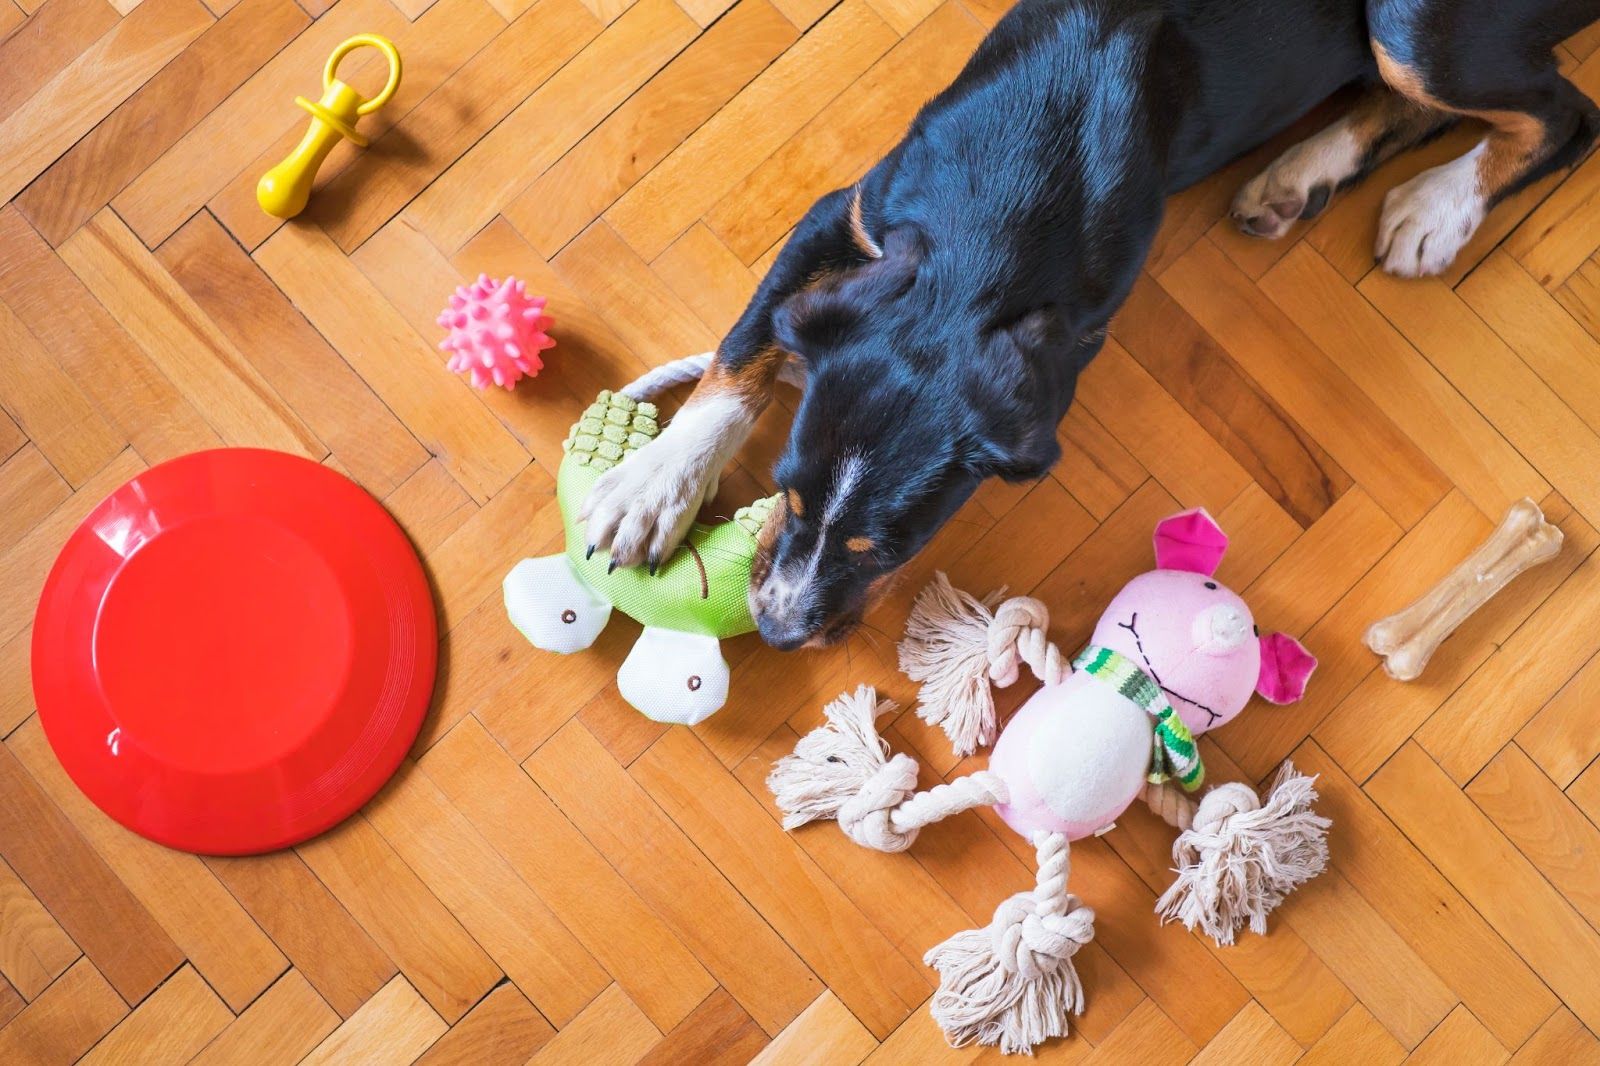 Can I use Bona floor cleaner on pet beds and toys?